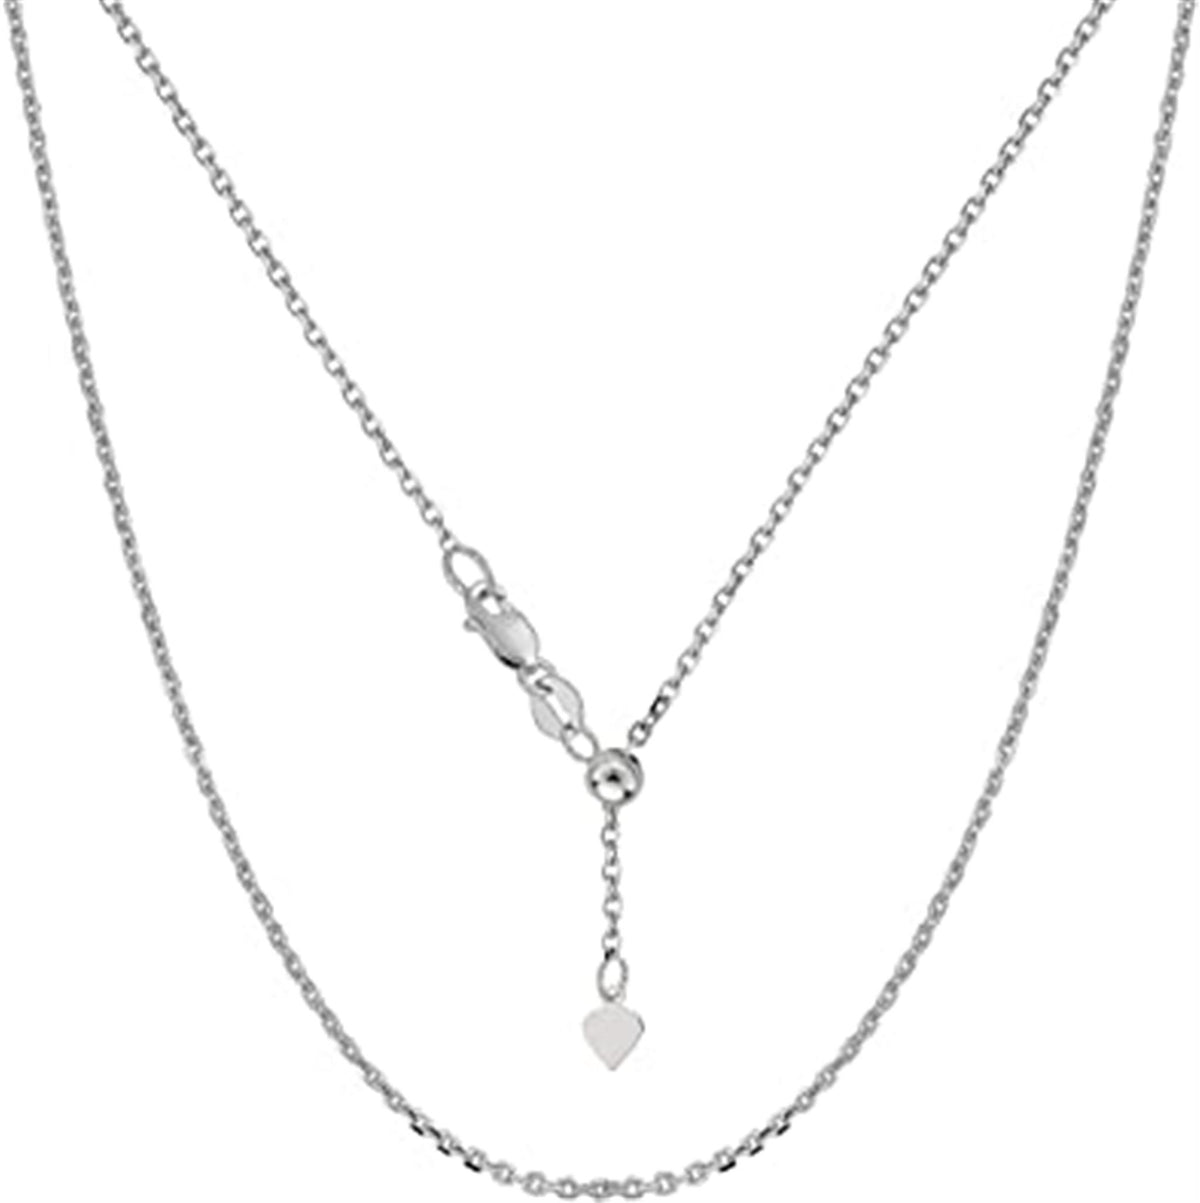 14K White Gold Adjustable Cable Link Chain